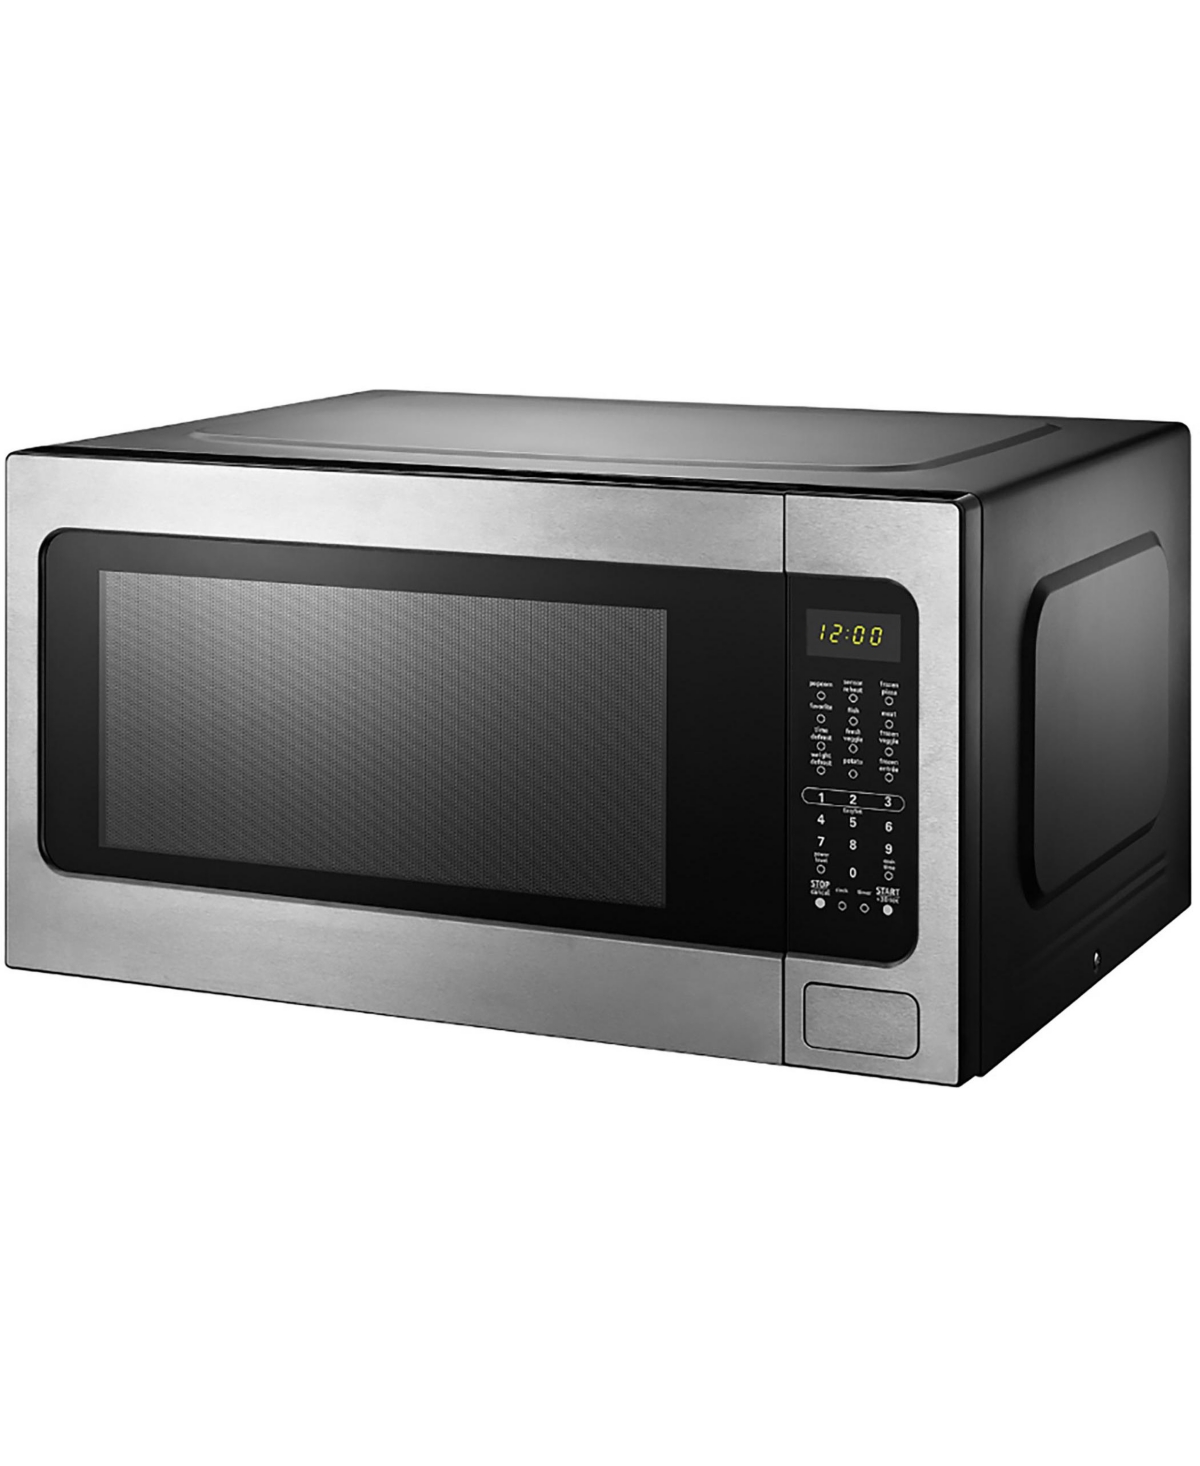 Black & Decker EM262AMY-phb 2.2 Cu. Ft. Microwave with Sensor Cooking, Stainless Steel